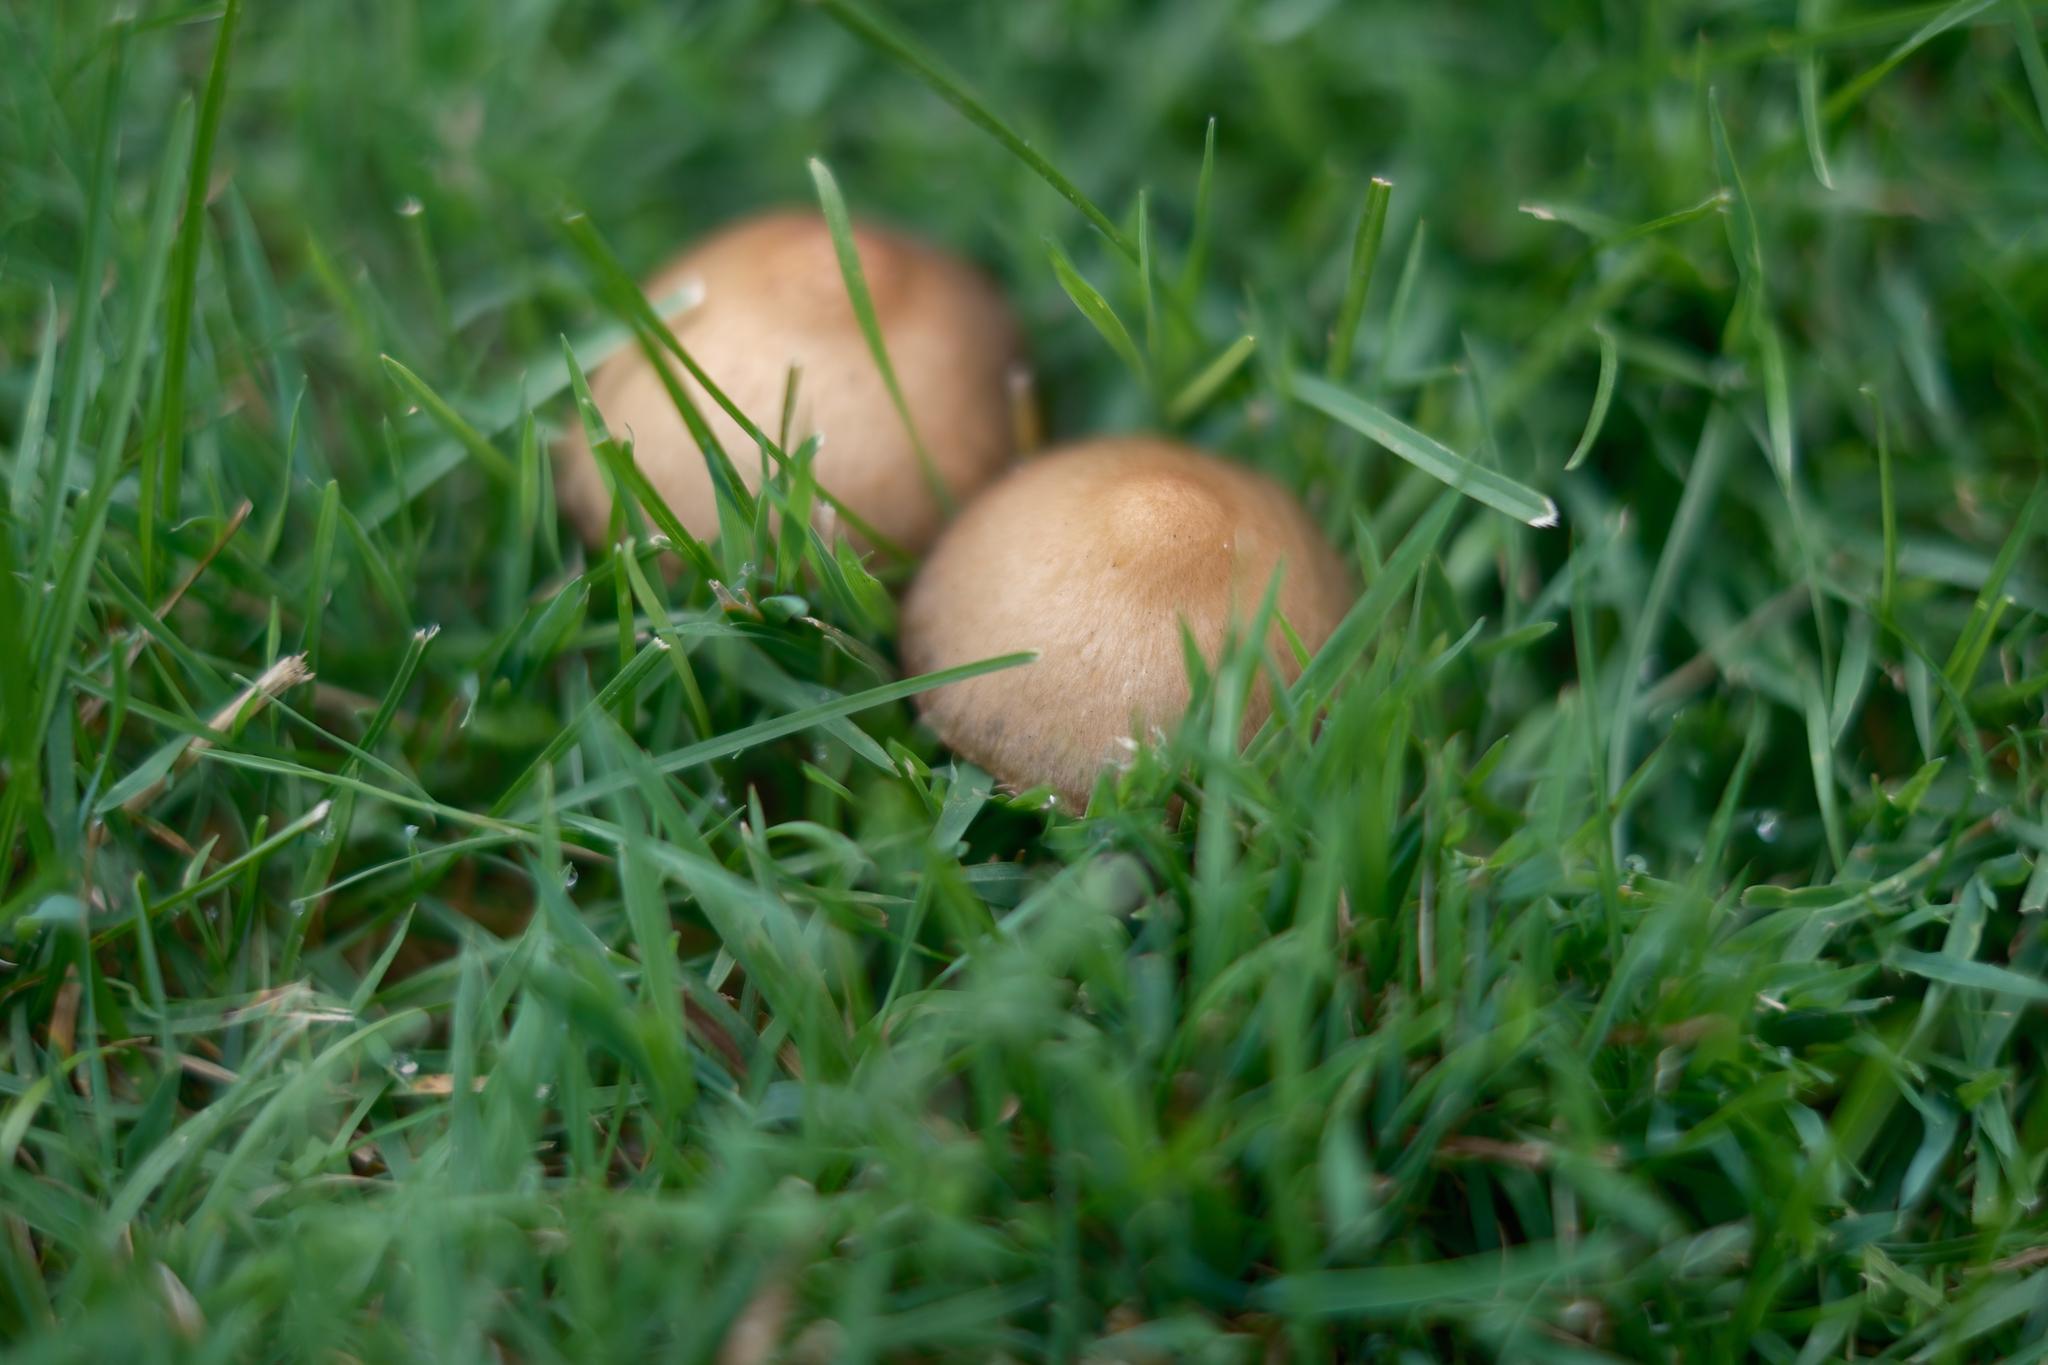 Two small mushrooms growing amidst green grass